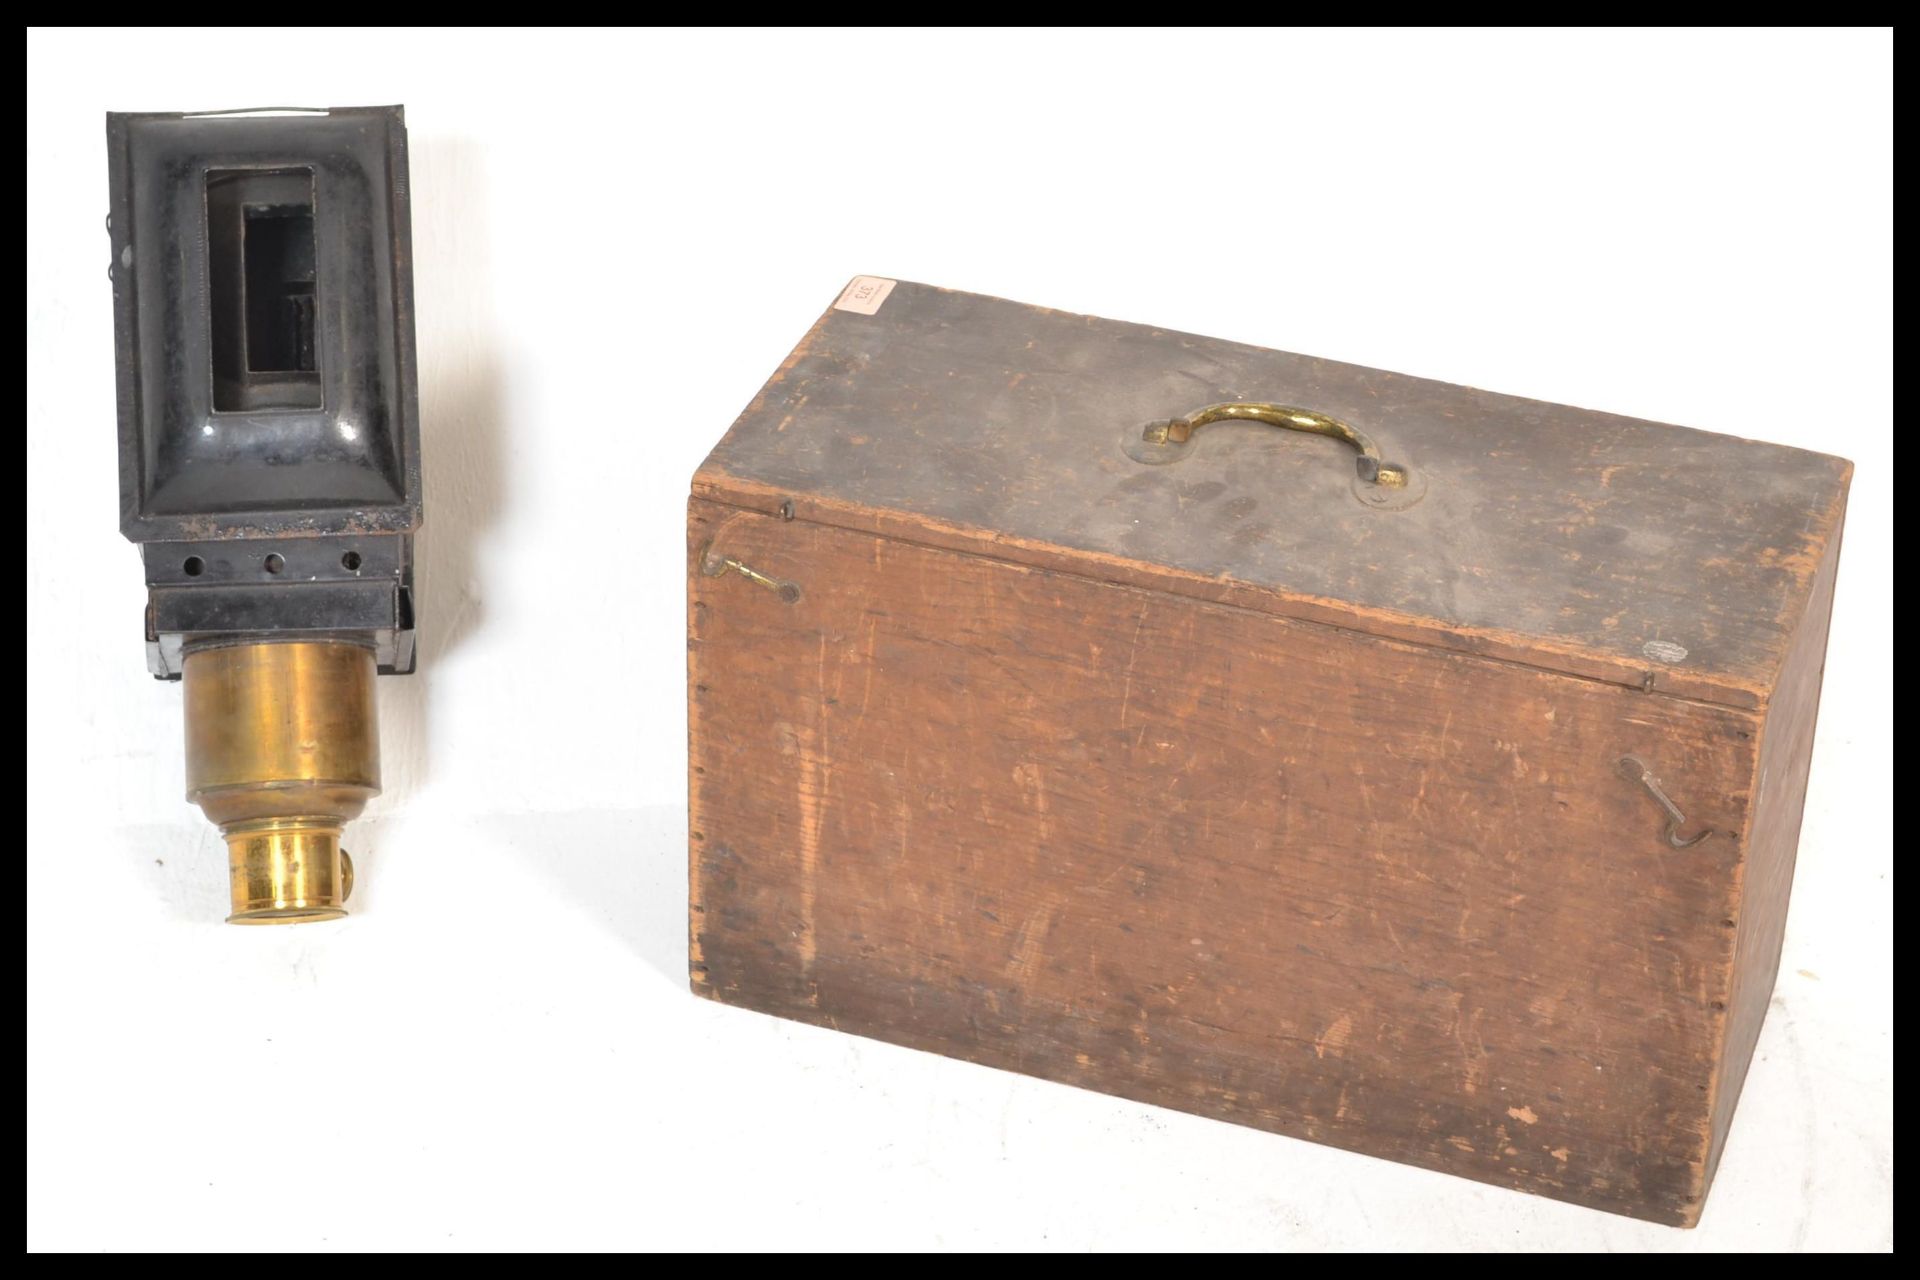 A vintage early 20th century magic lantern slide viewer of wooden and brass construction set